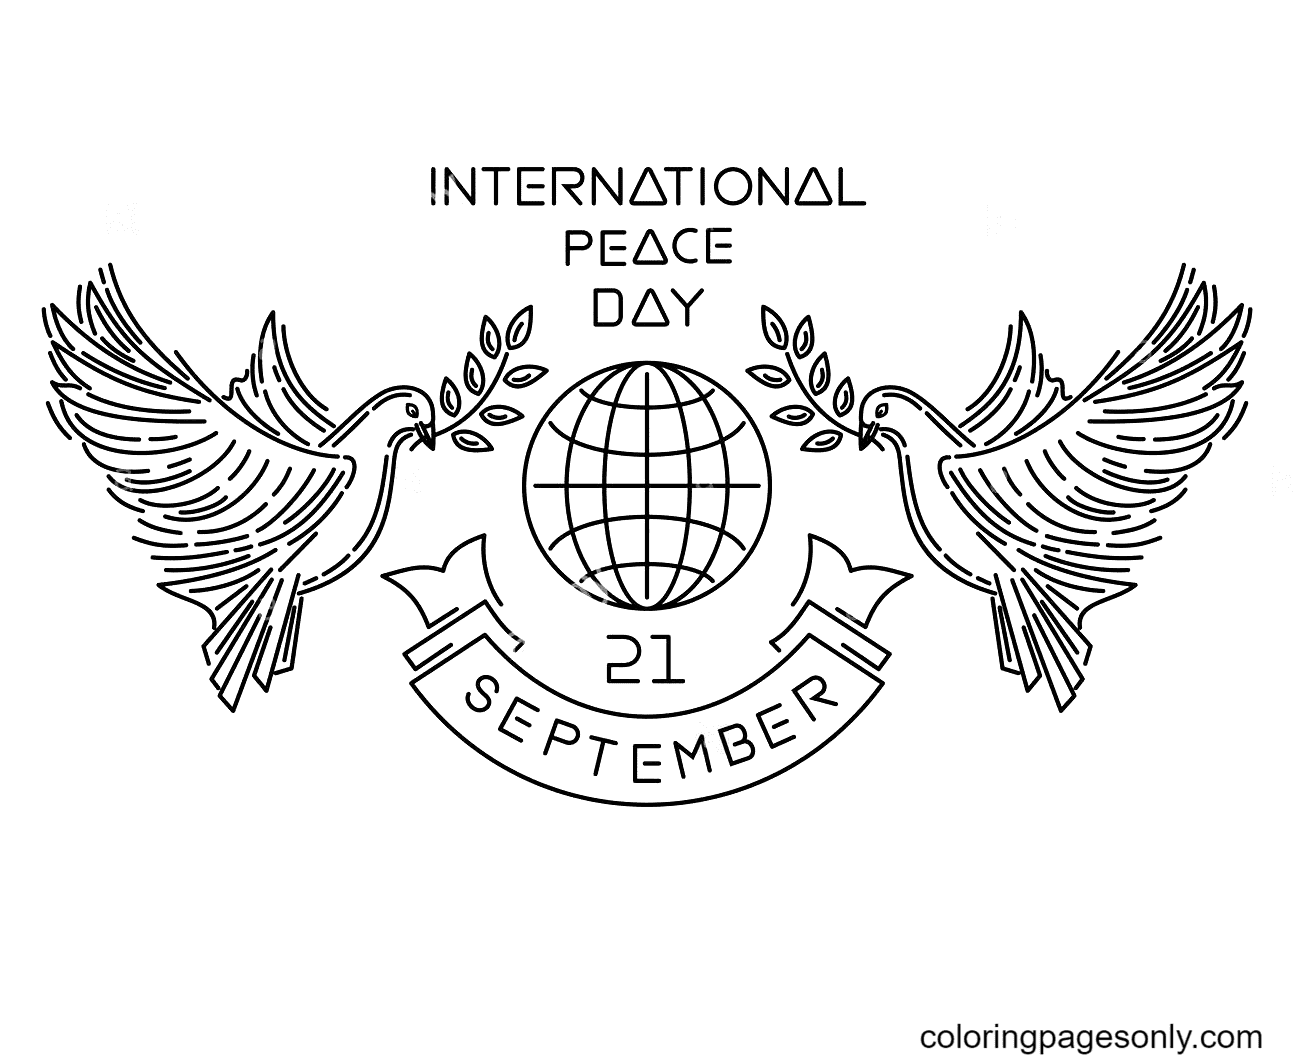 International Peace Day known as World Peace Day Coloring Page